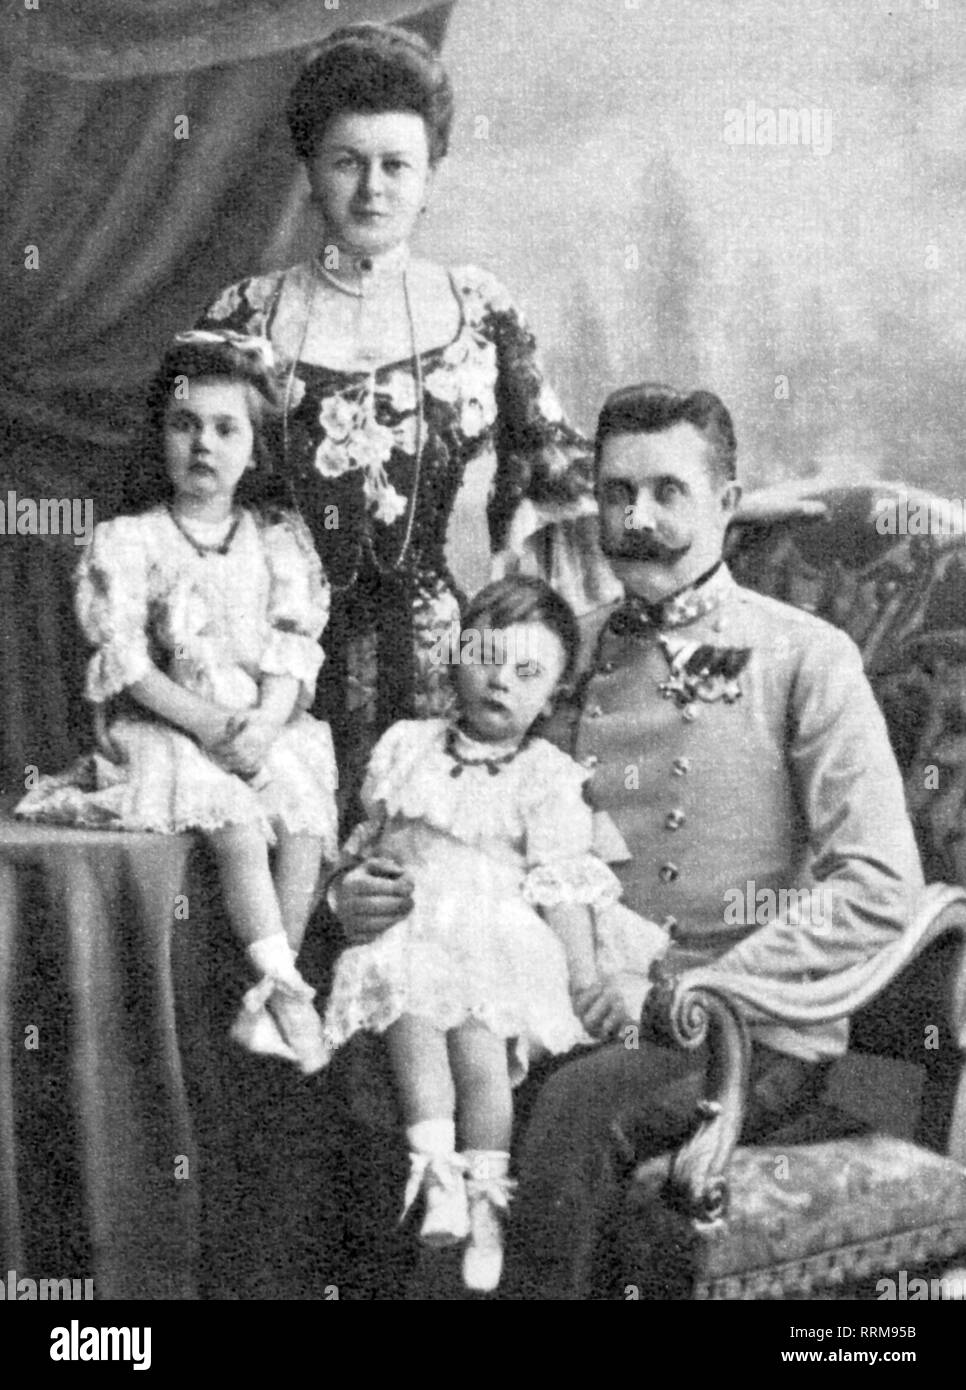 Franz Ferdinand, 18.12.1863 - 28.6.1914, Heir Presumtive of Austria-Hungary 30.1.1889 - 28.6.1914, half length, with his family, 1905, Additional-Rights-Clearance-Info-Not-Available Stock Photo